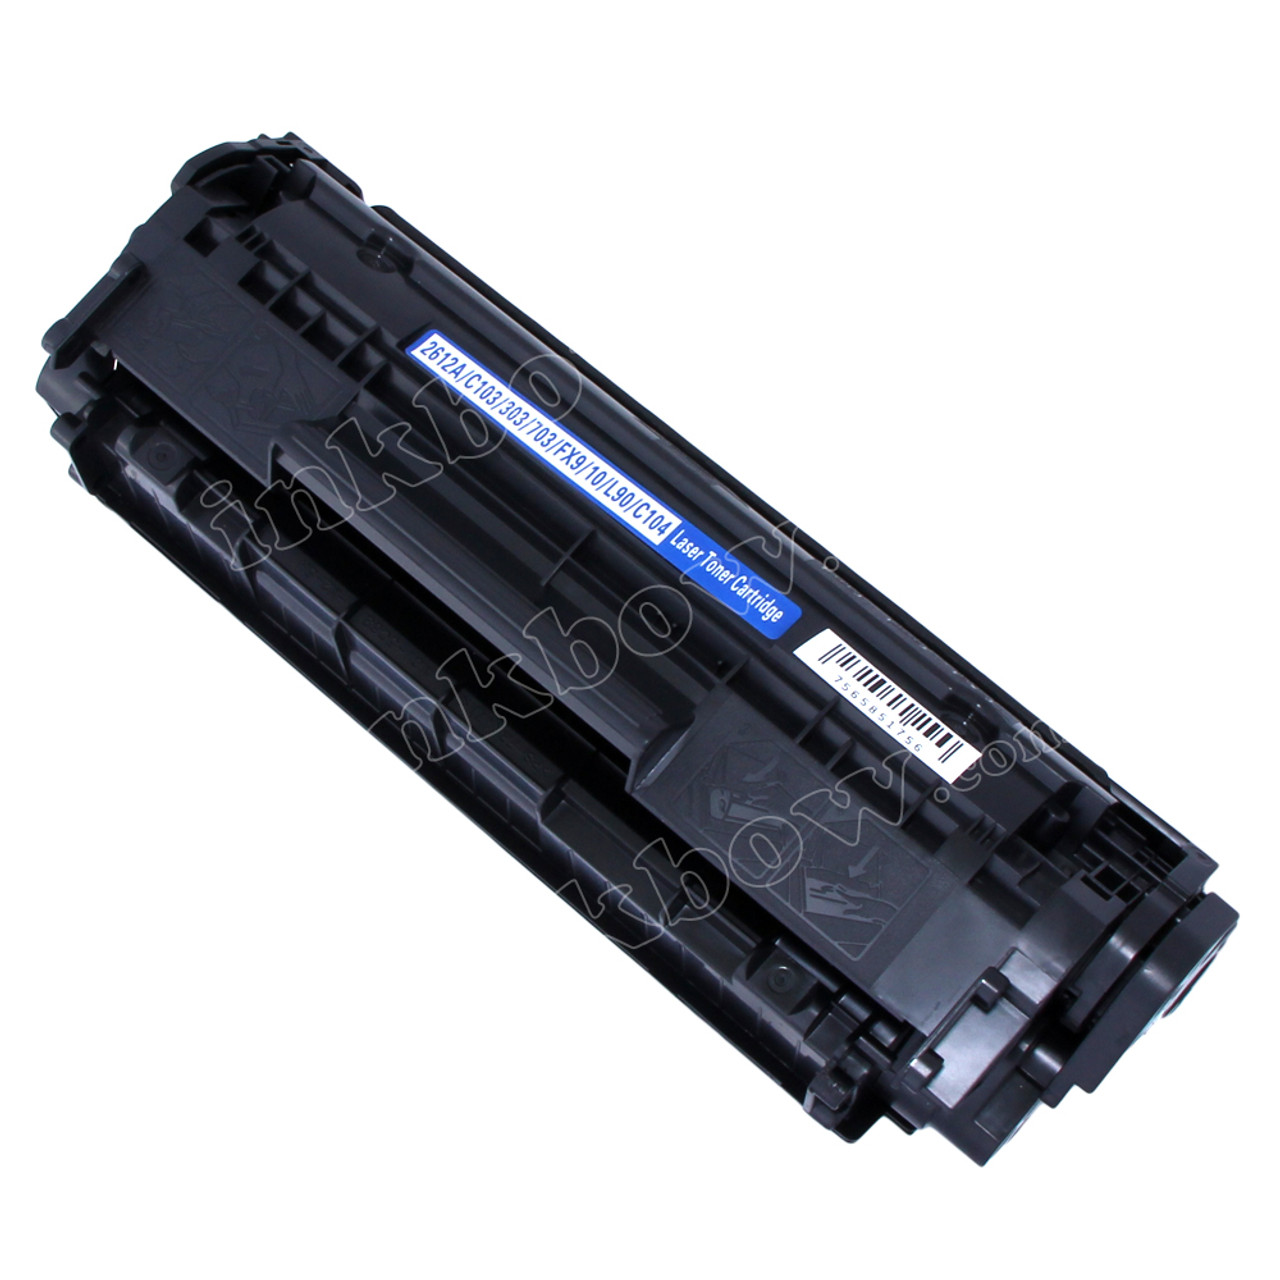 Compatible HP 12A Black Laser Toner Cartridge | HP Q2612A LaserJet Toner  Price in Singapore | Where to Buy the Cheapest 2612A Toner